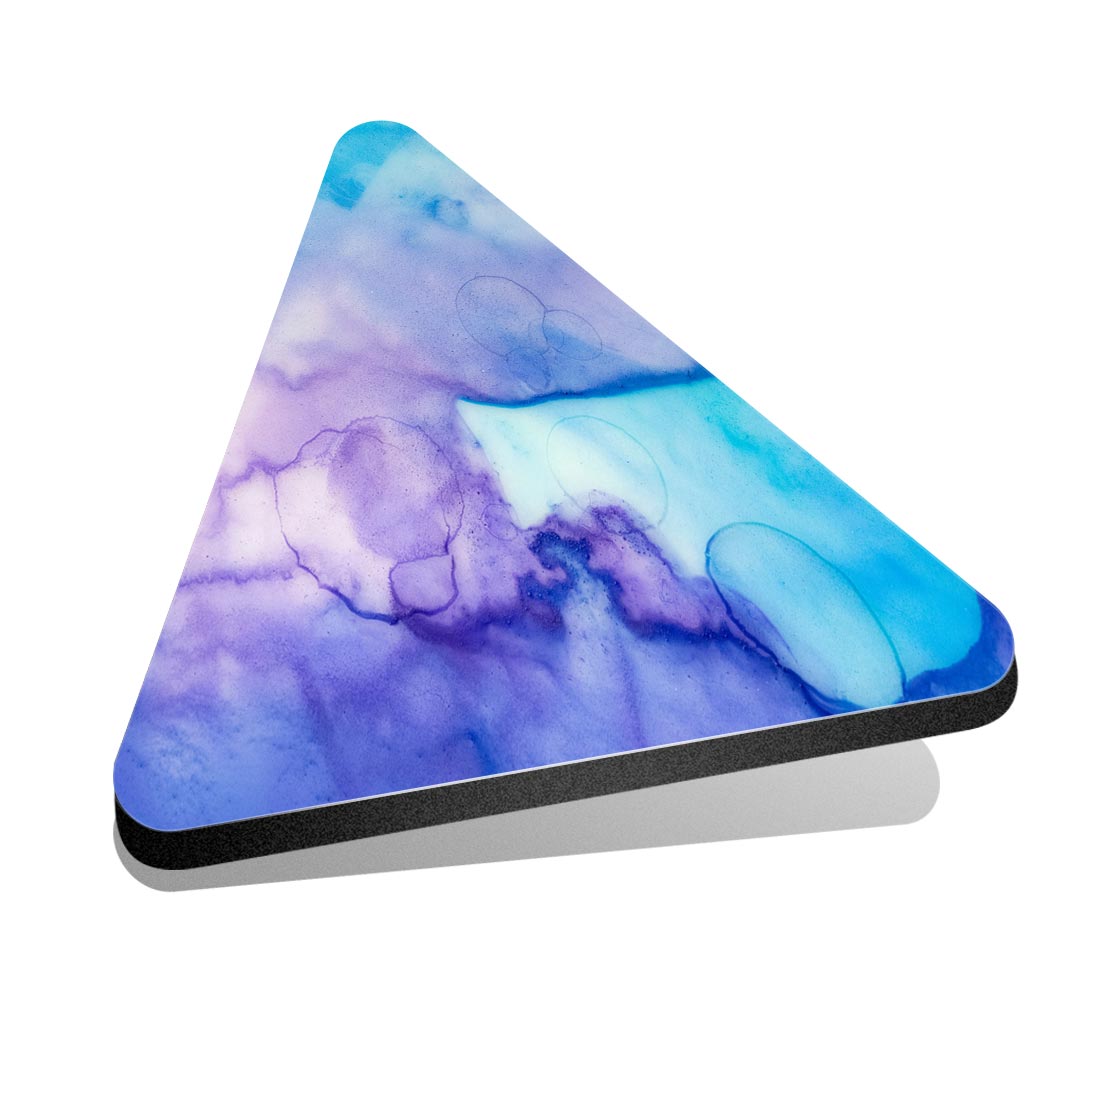 1x Triangle Fridge MDF Magnet Abstract Light Blue Purple Ink Art #50025 - Picture 1 of 1